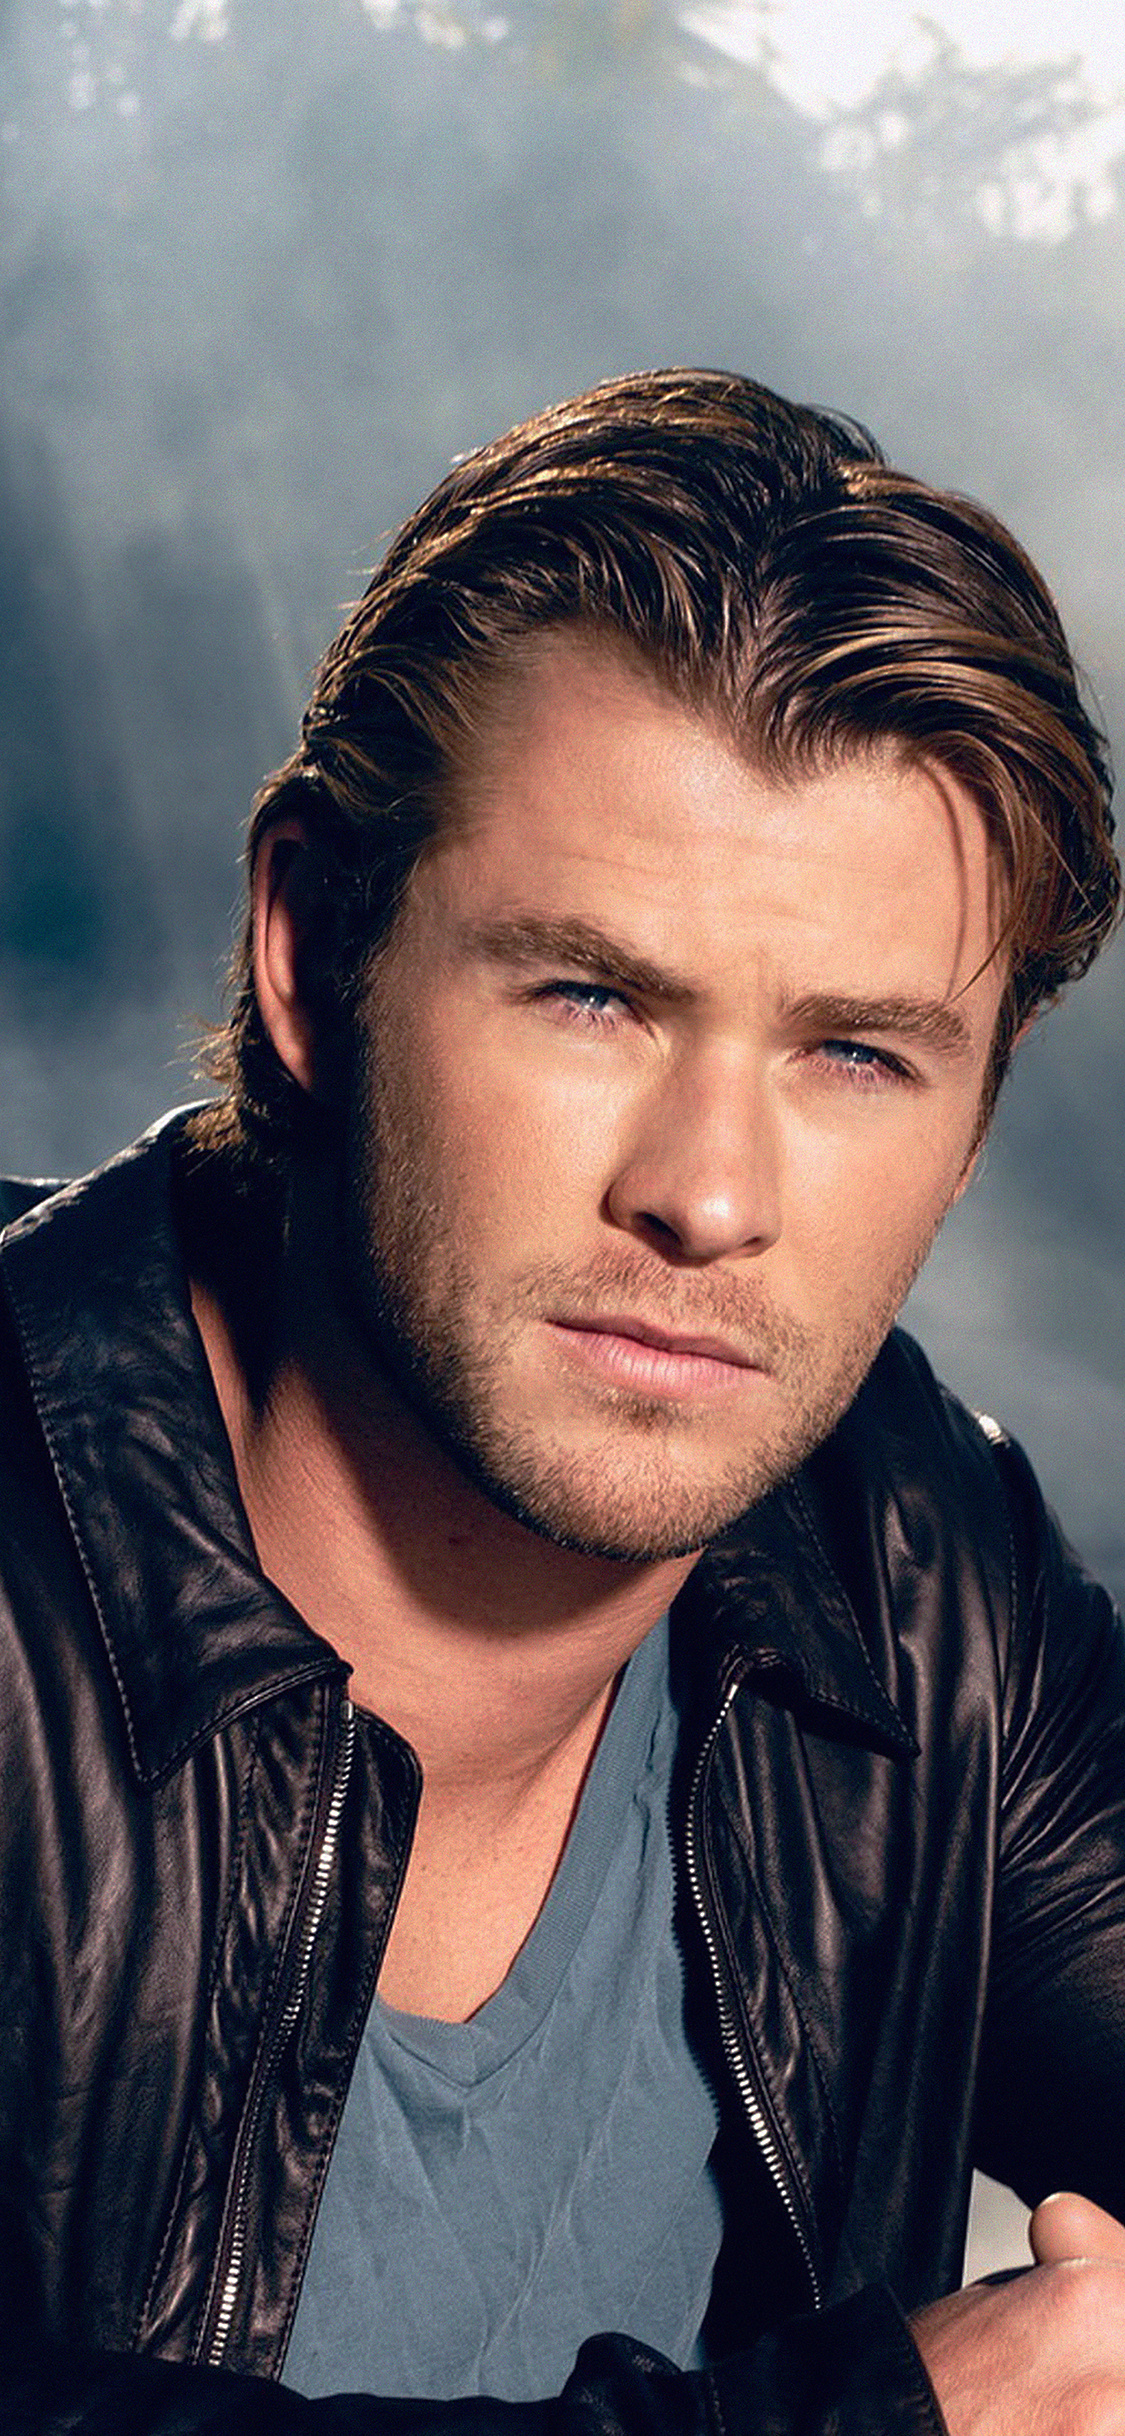 Chris Hemsworth: A leading role in the horror movie The Cabin in the Woods, 2011. 1130x2440 HD Background.